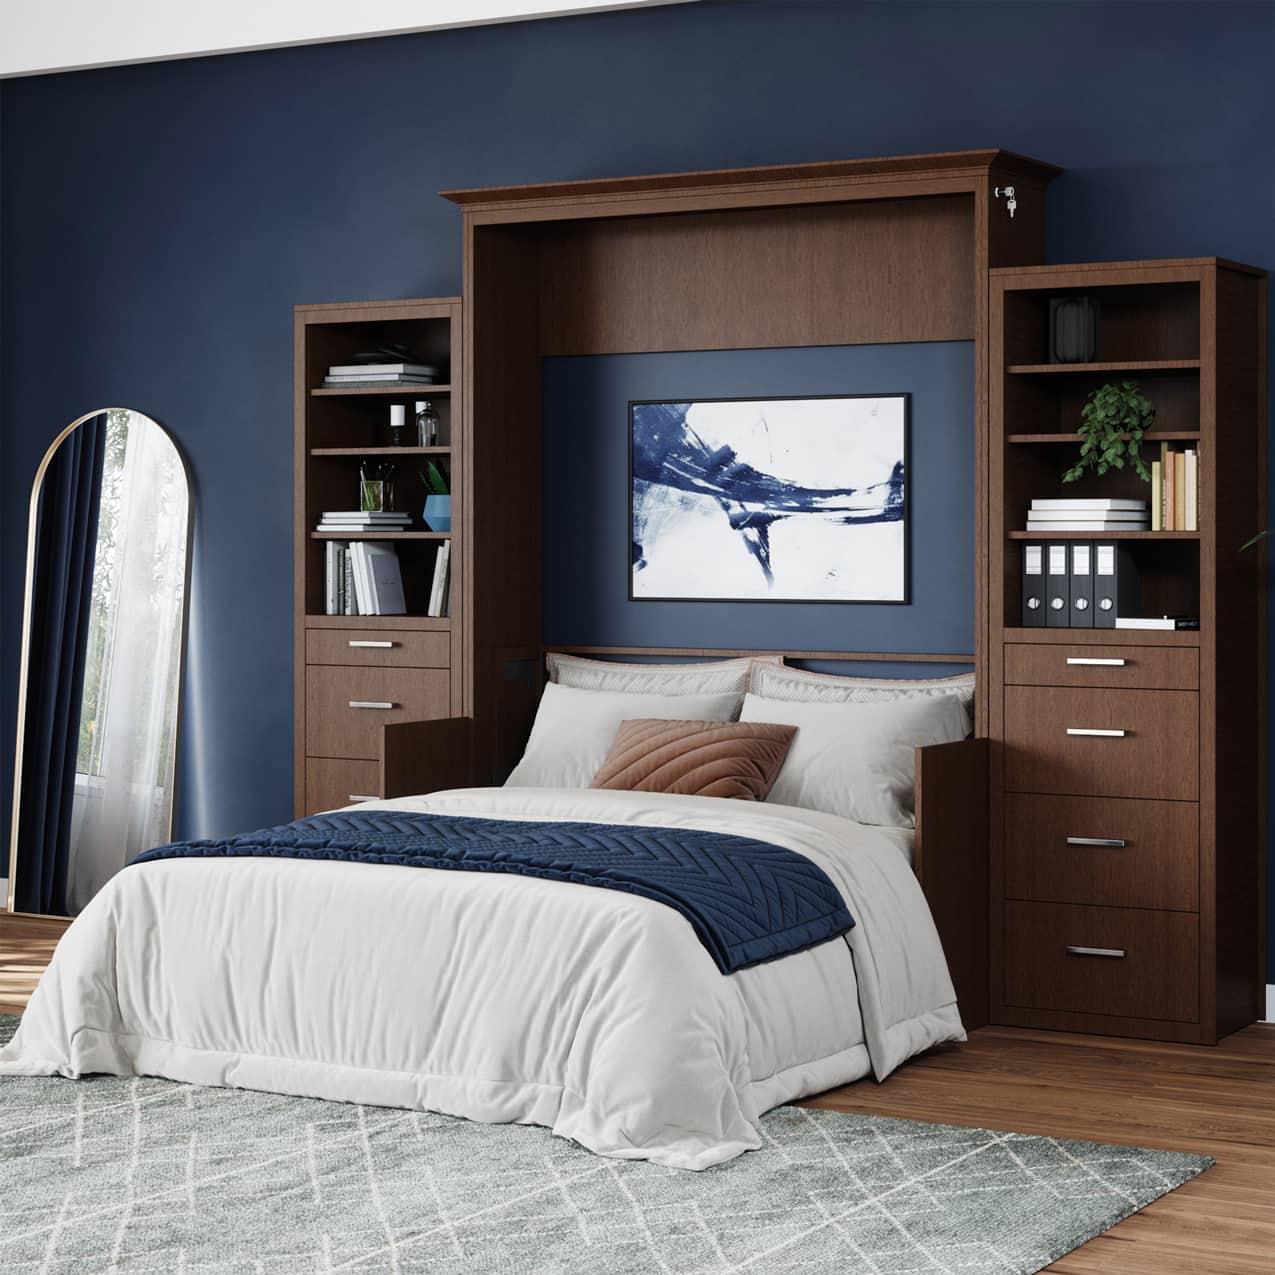 coventry full murphy bed with deks and storage cabinets bed open hidden hideaway hide away hide-a-way diy murphy bed kit fold out pull down wall bed cabinet desk bed combo home office guest bed customizable storage adjustable shelves pullout nightstand drawers